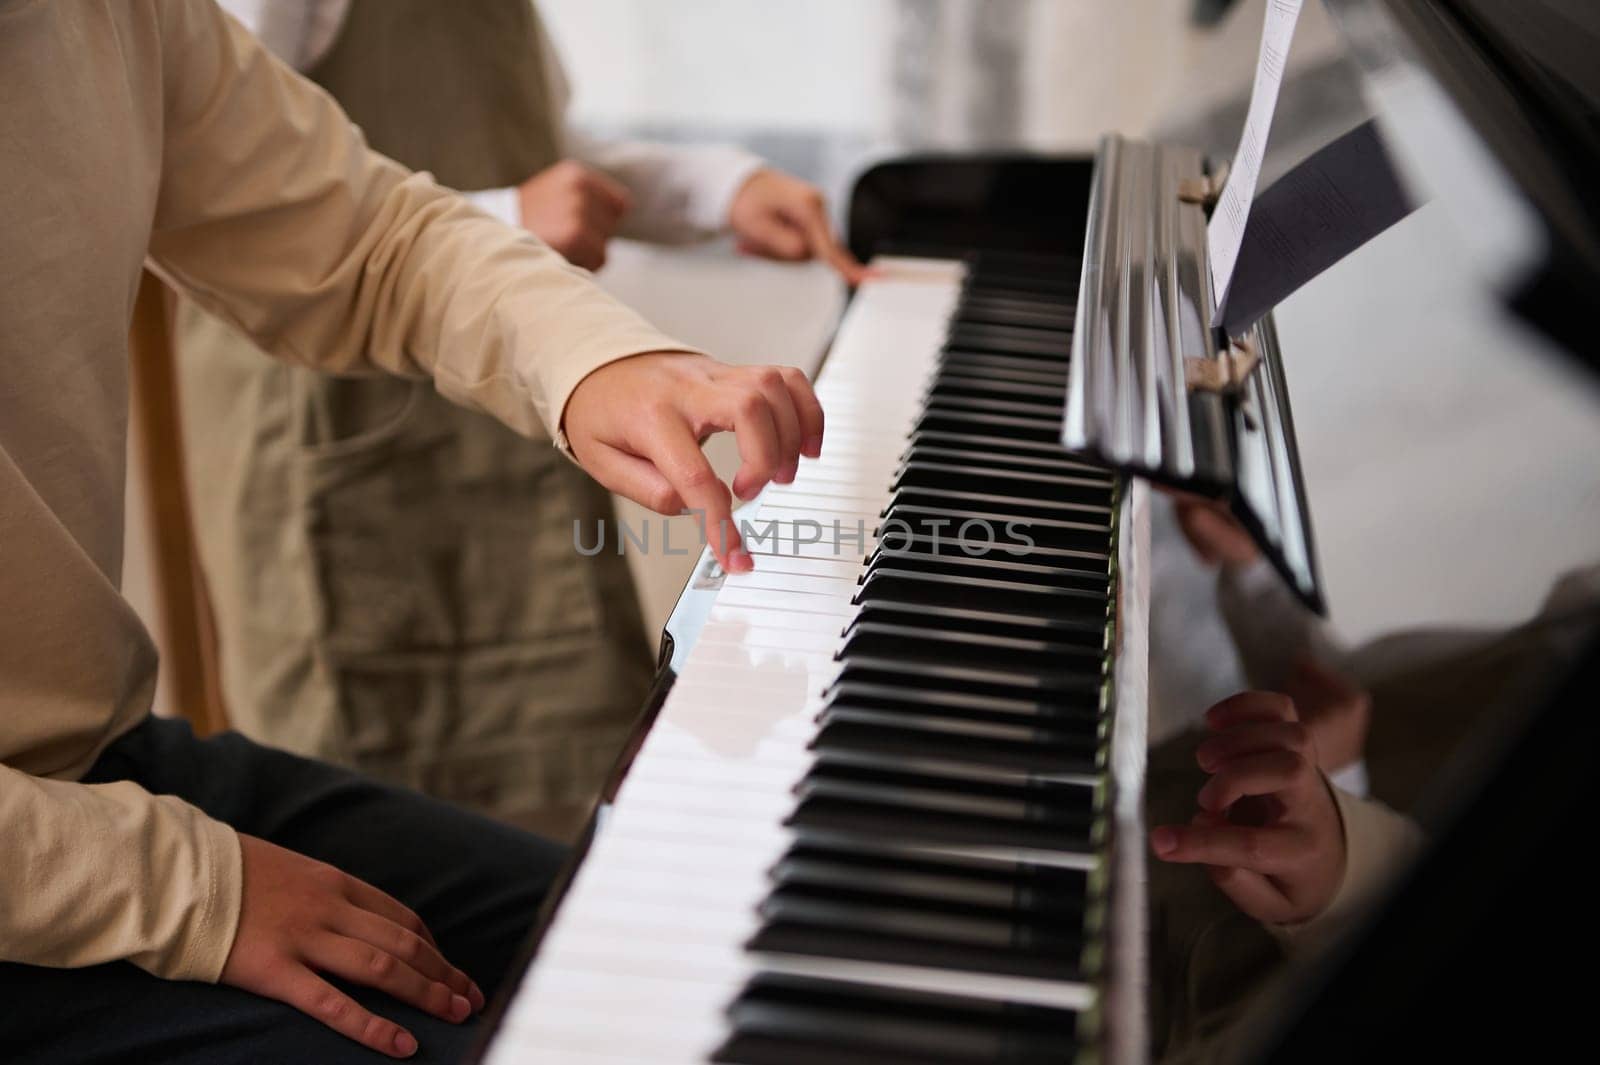 Details on children hands touching white and black piano keys while performing a musical composition, playing grand piano indoor